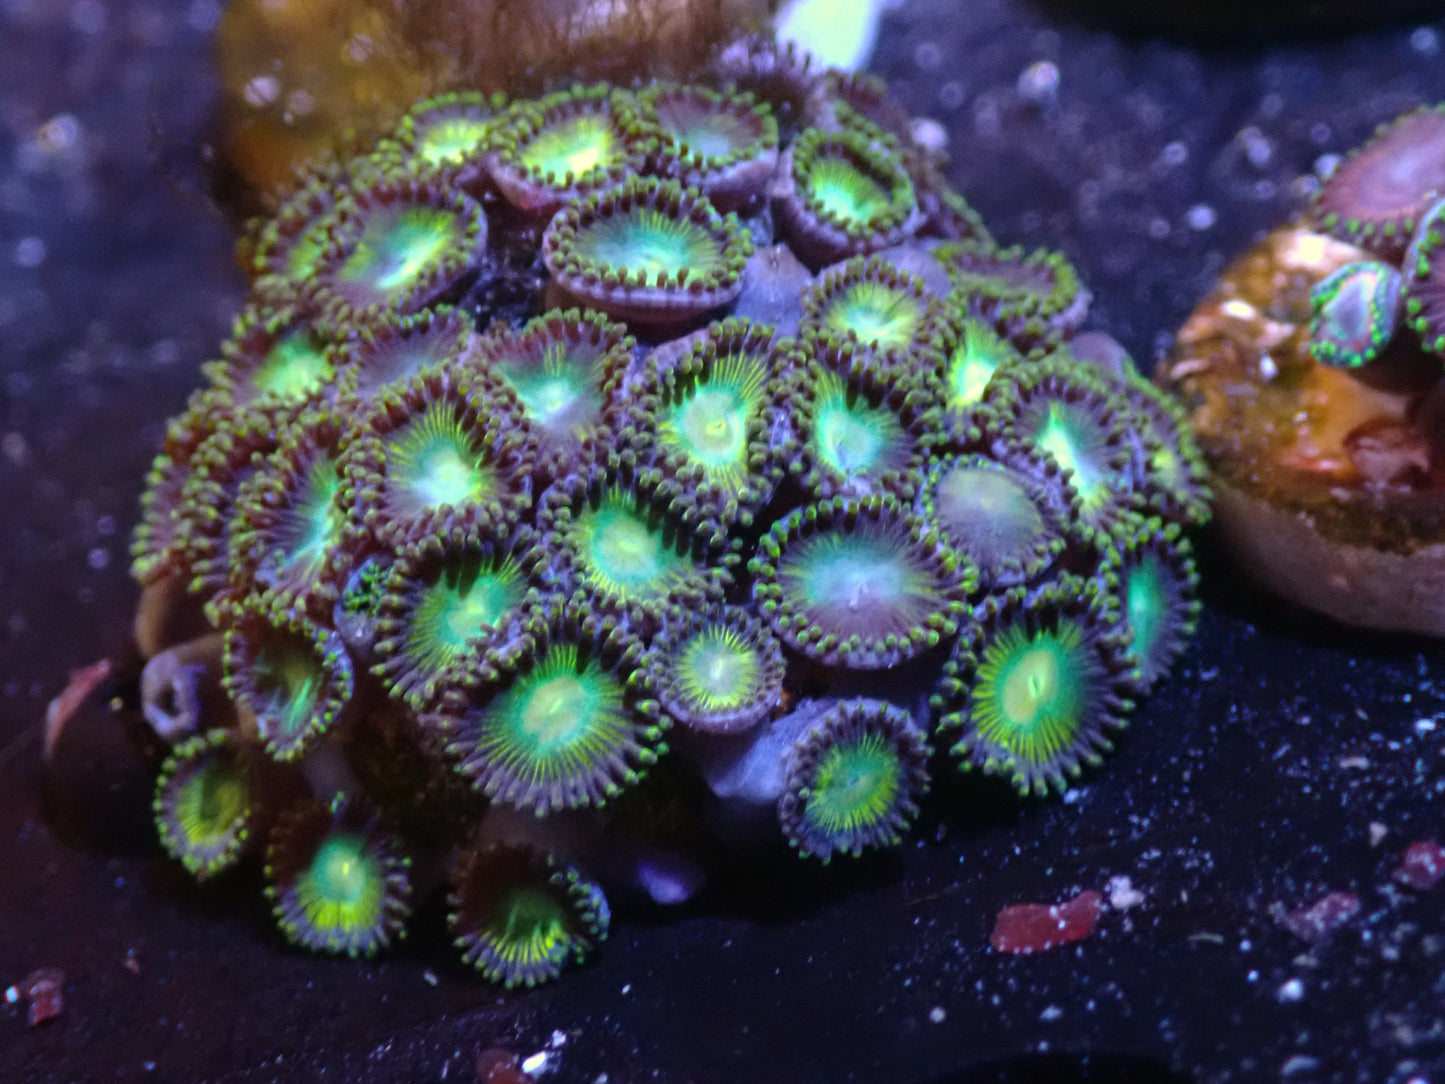 LG Unkown Zoas Auctions 8/11 ended